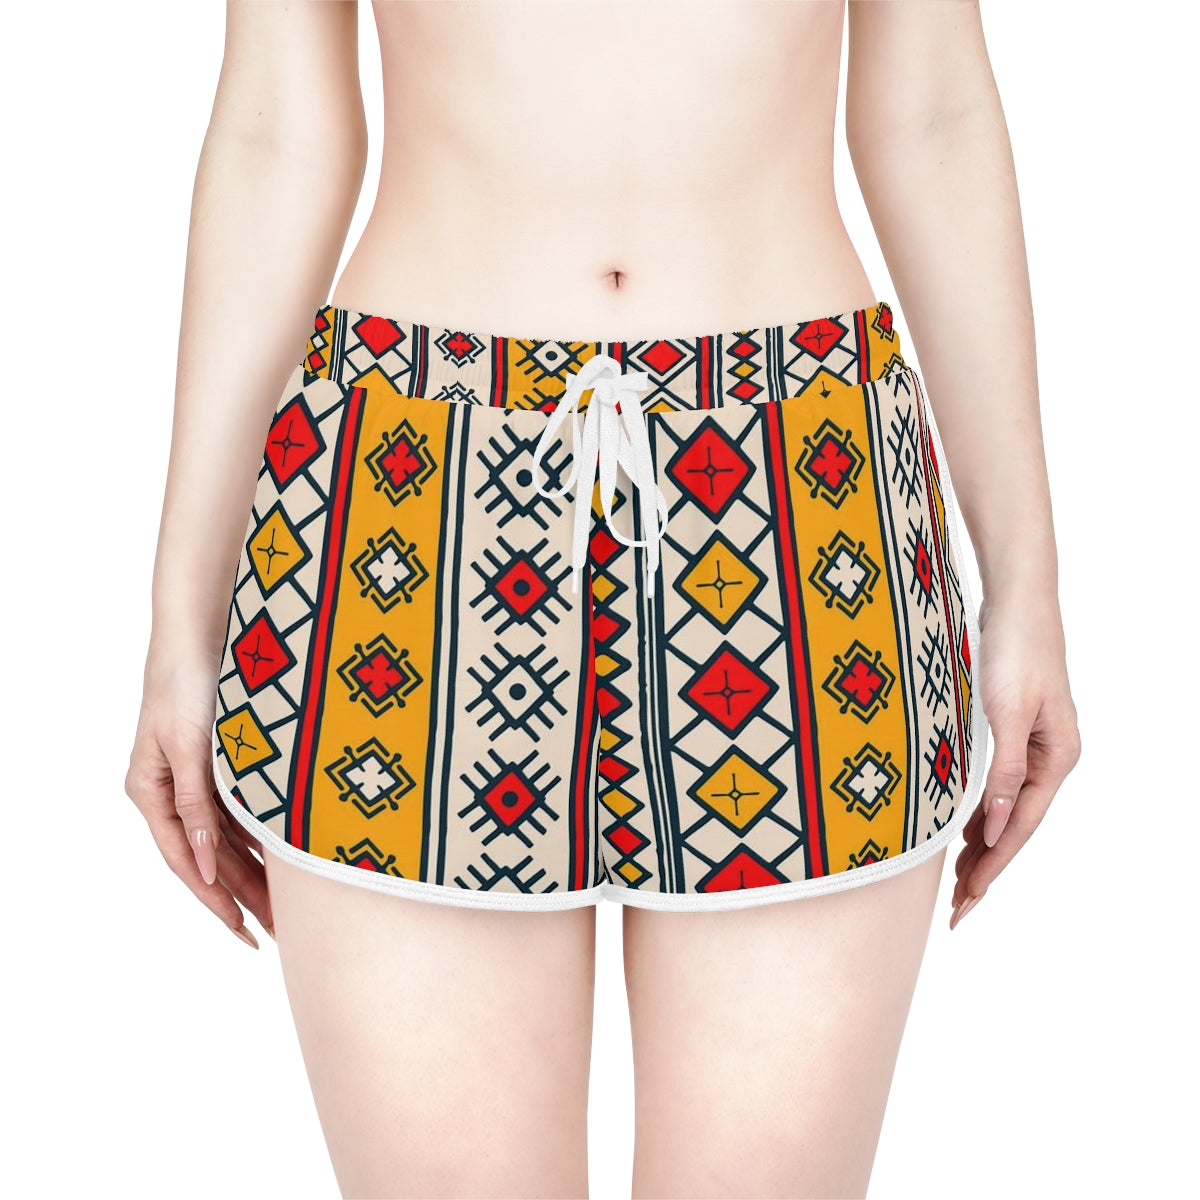 African Print Yellow Red Shorts for Women